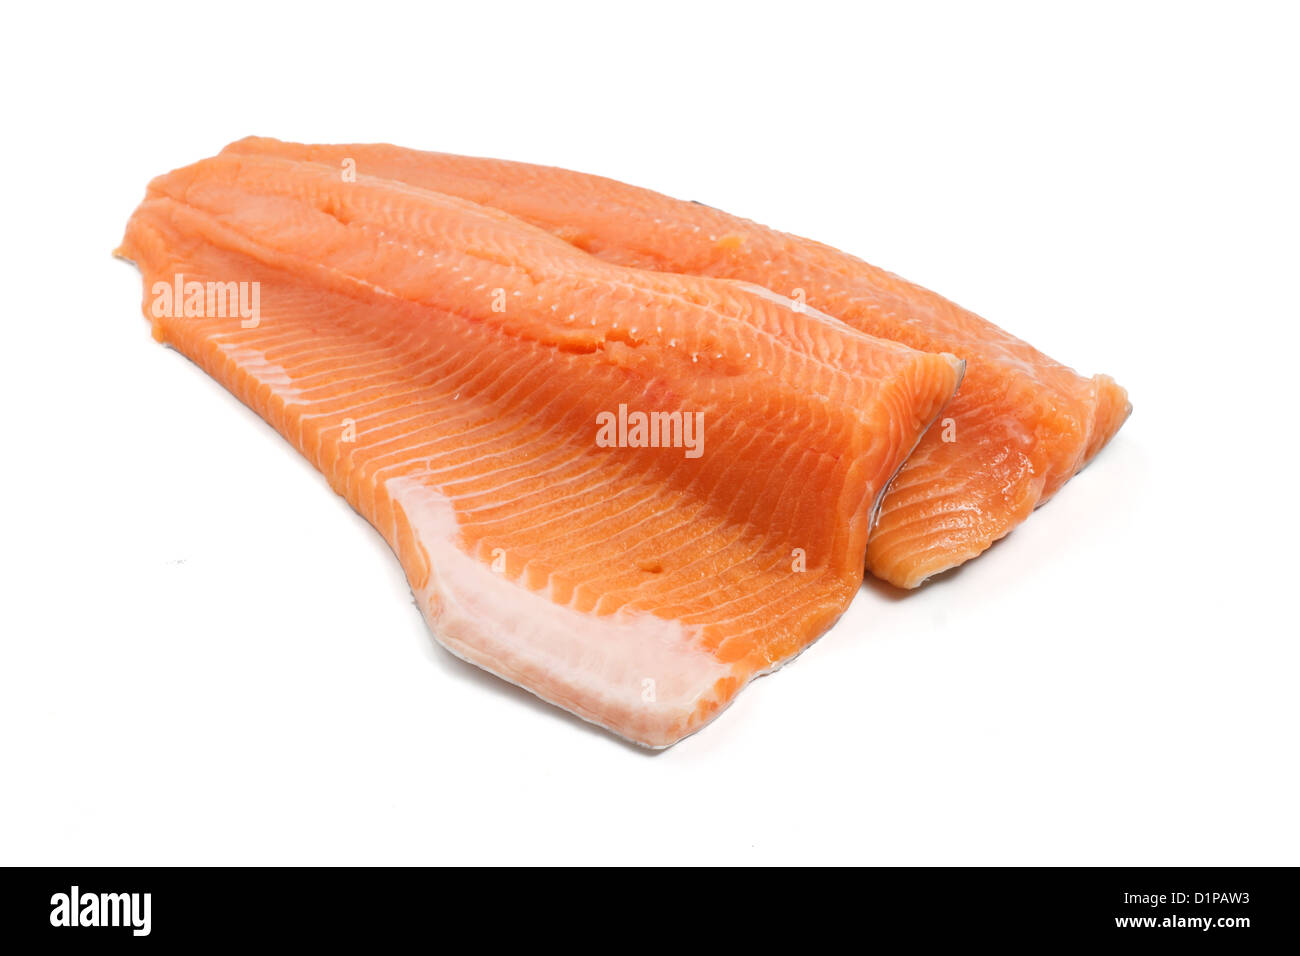 two salmon trout fillets over white background Stock Photo